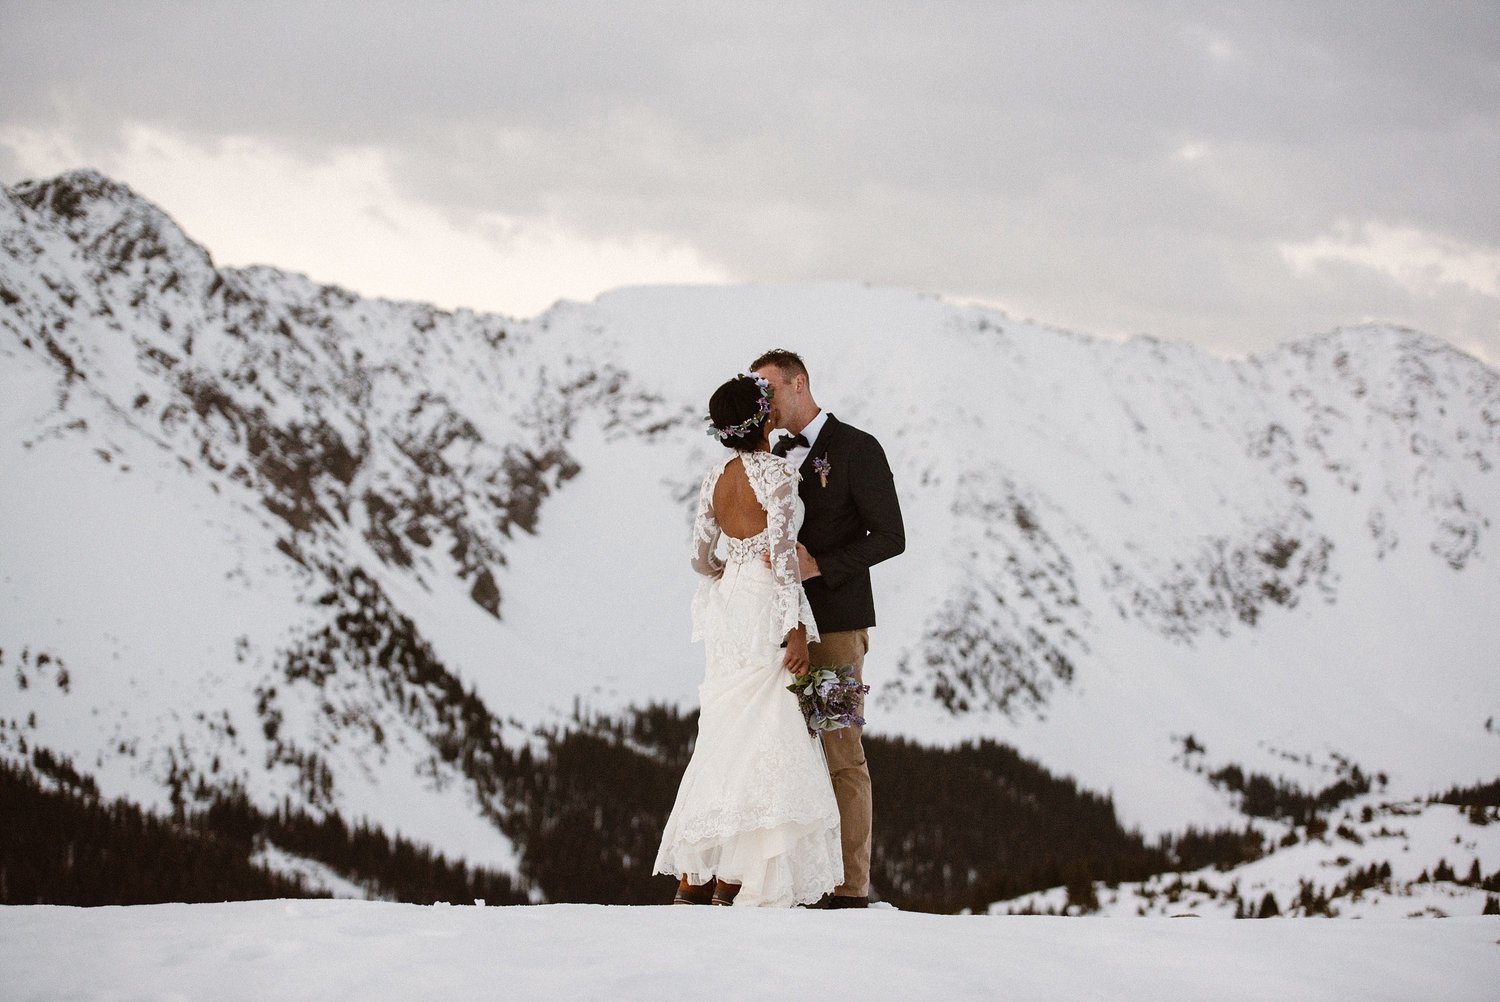 Bride and groom kiss at Loveland Pass, in Colorado. There is snow covering the ground and the mountains in the background.  